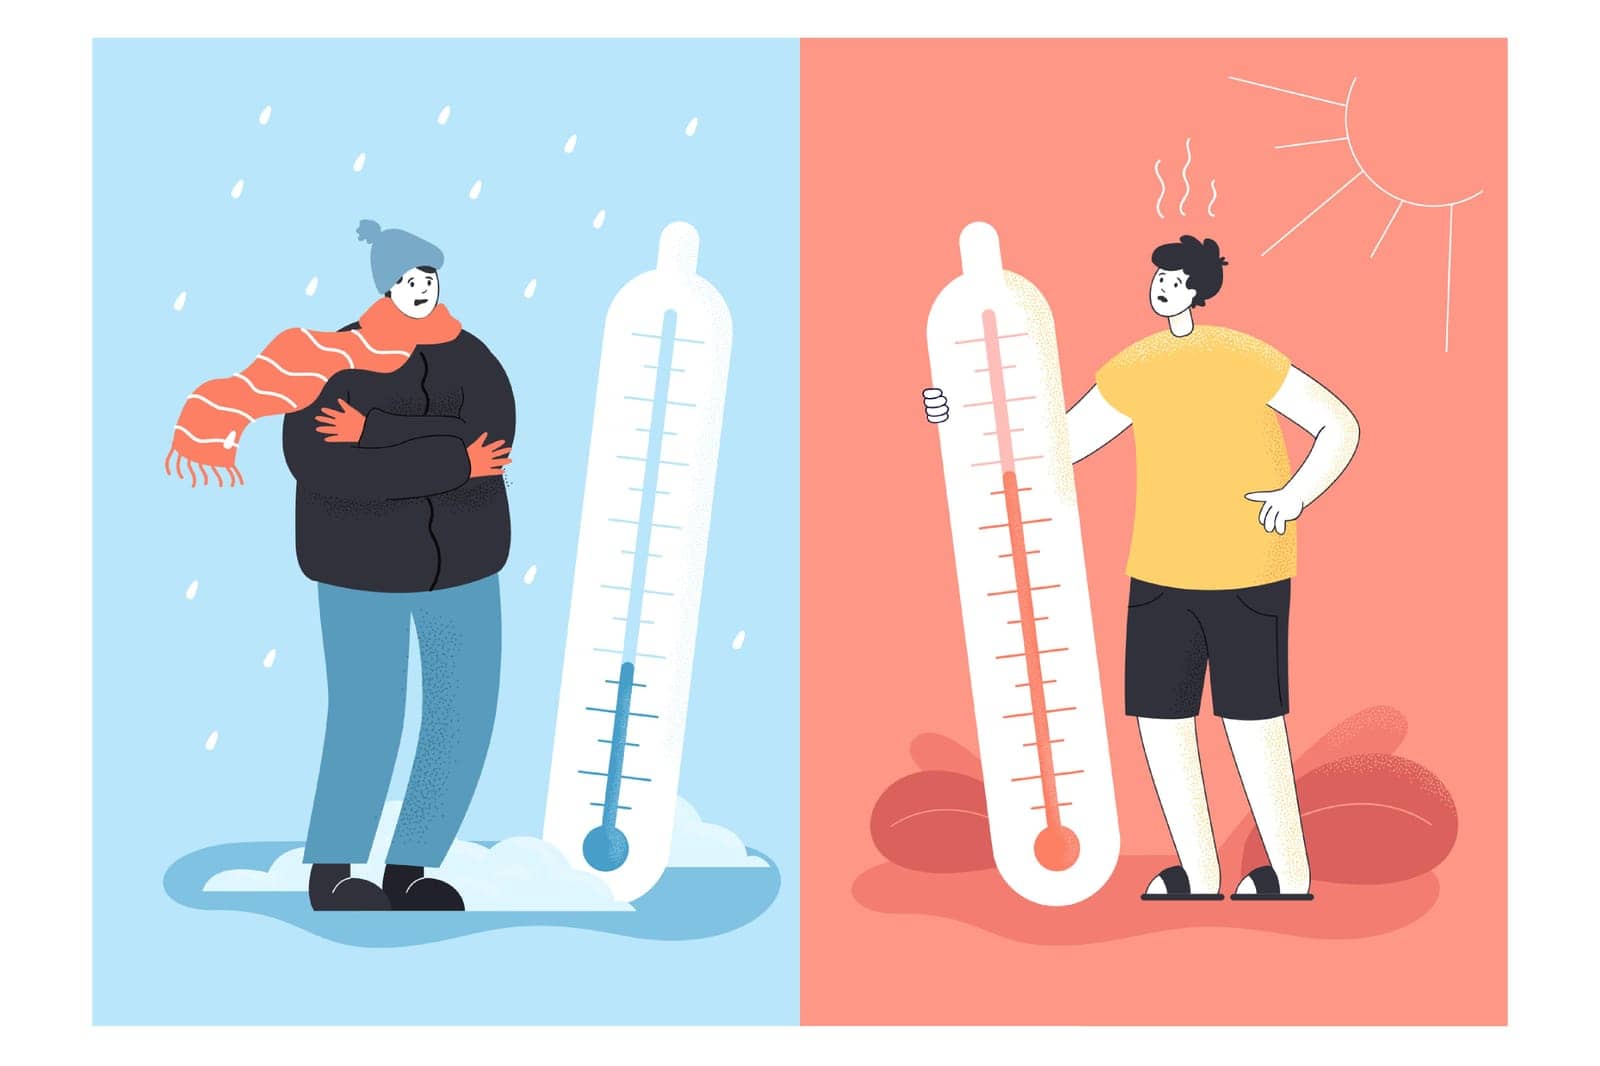 Contrast of winter and summer, cold and hot weather. Flat vector illustration. Tiny person hugging giant thermometer showing low and high air temperatures. Forecast, climate, season, weather concept